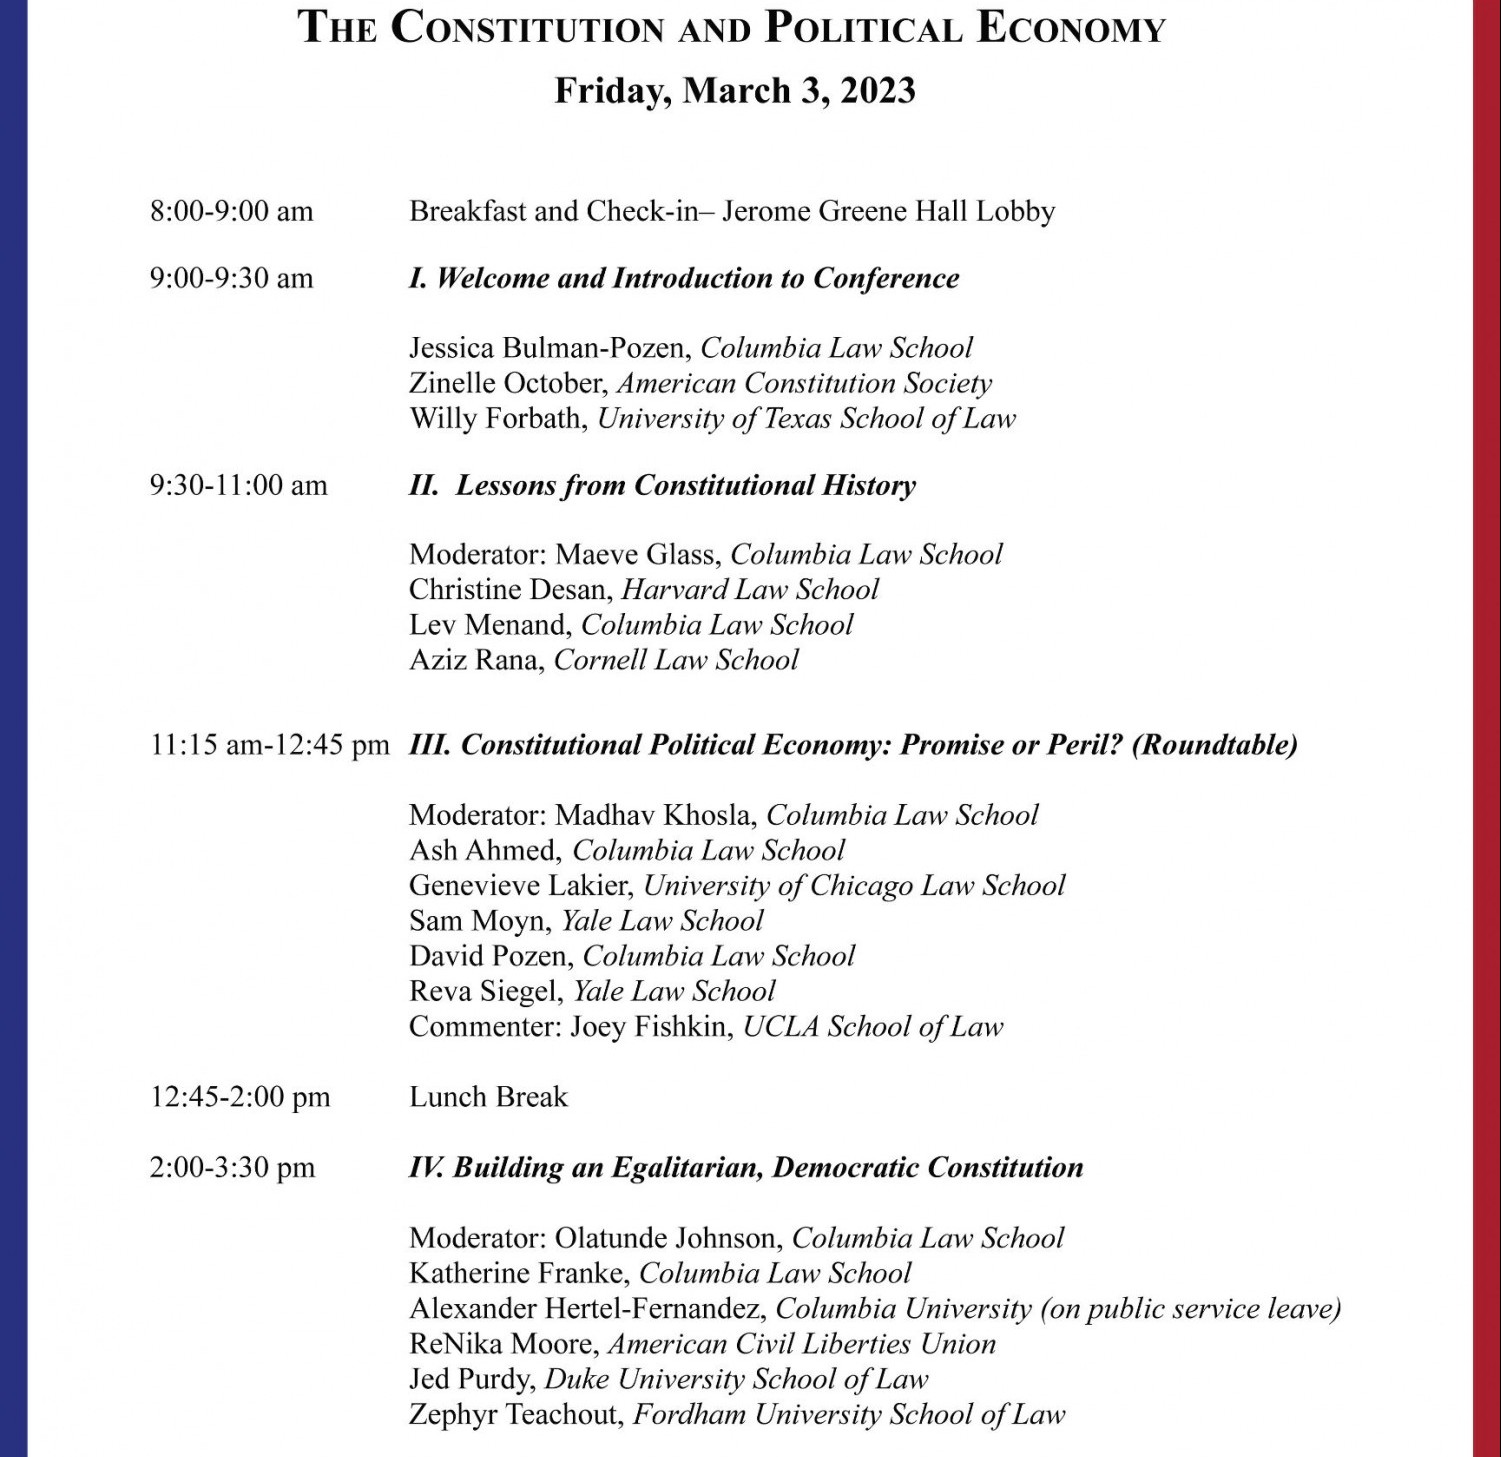 The Constitution and Political Economy Conference Agenda